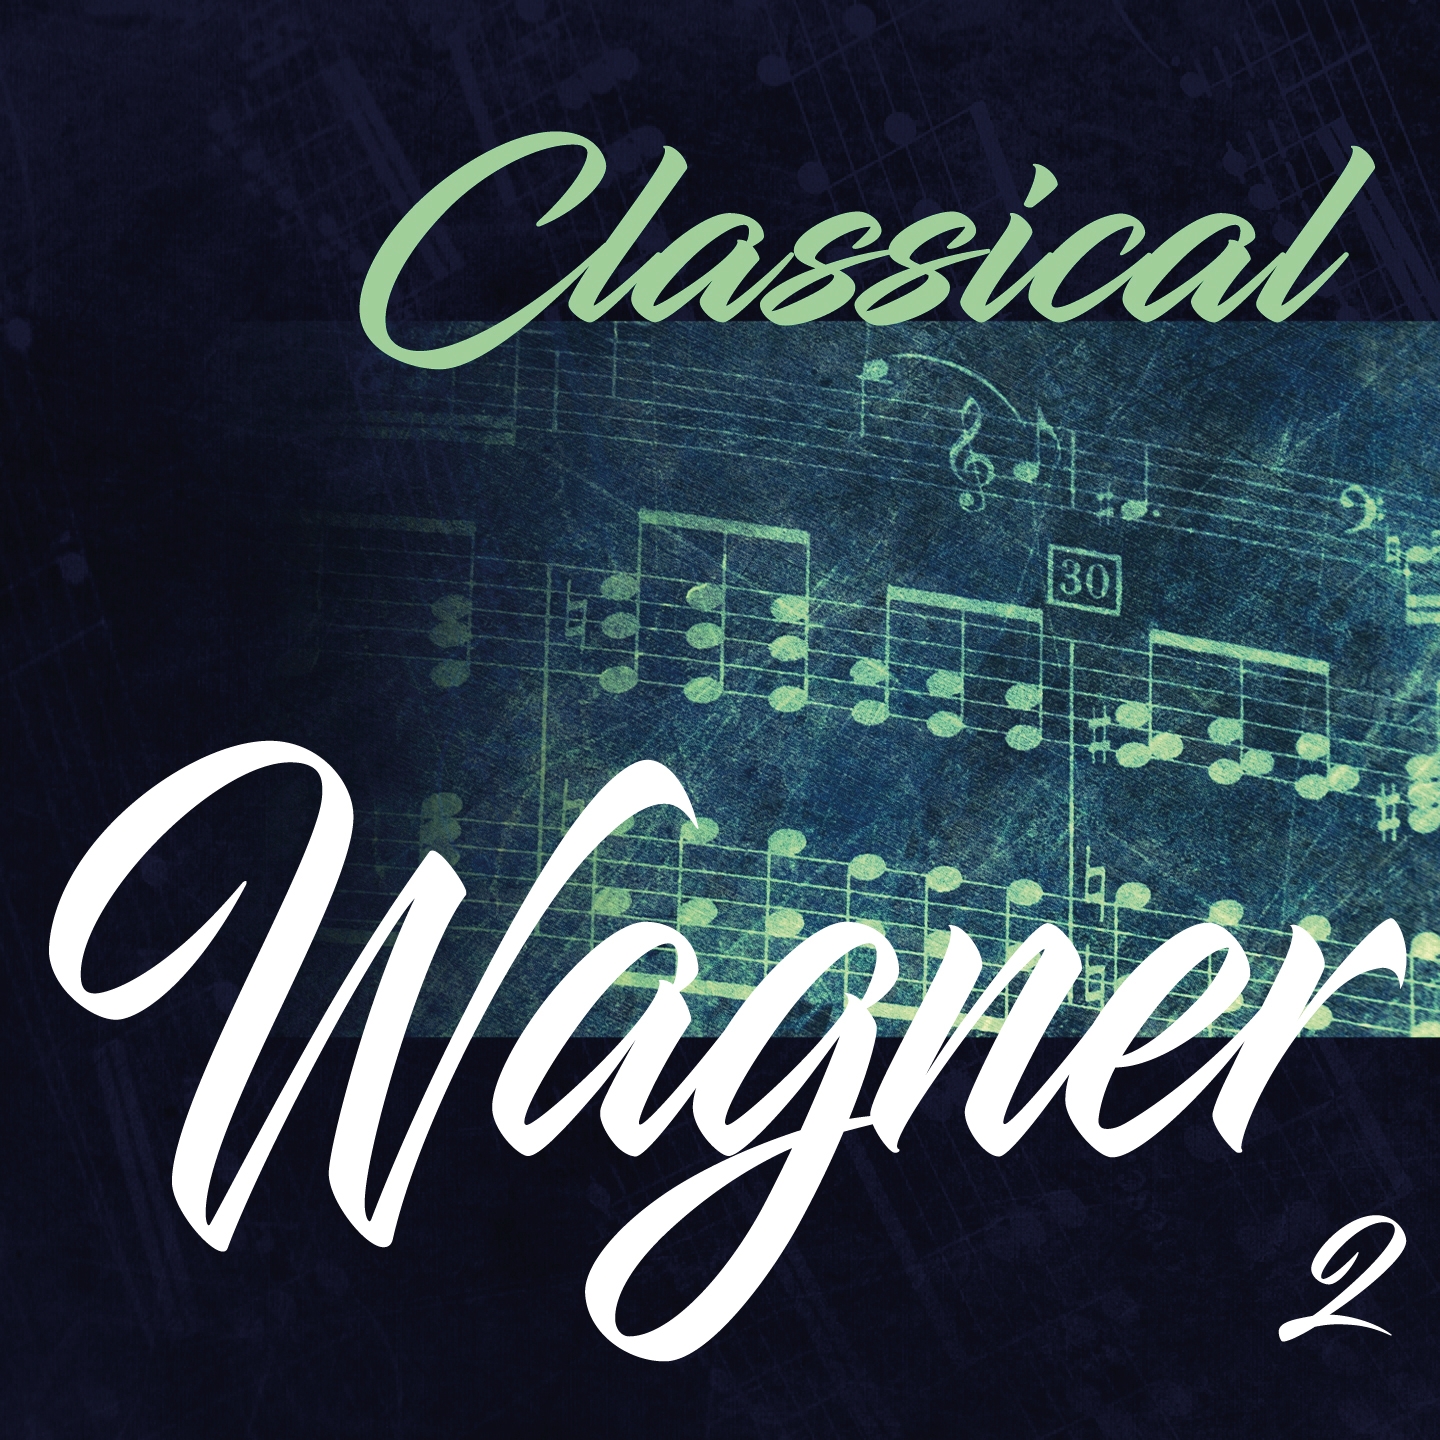 Classical Wagner 2